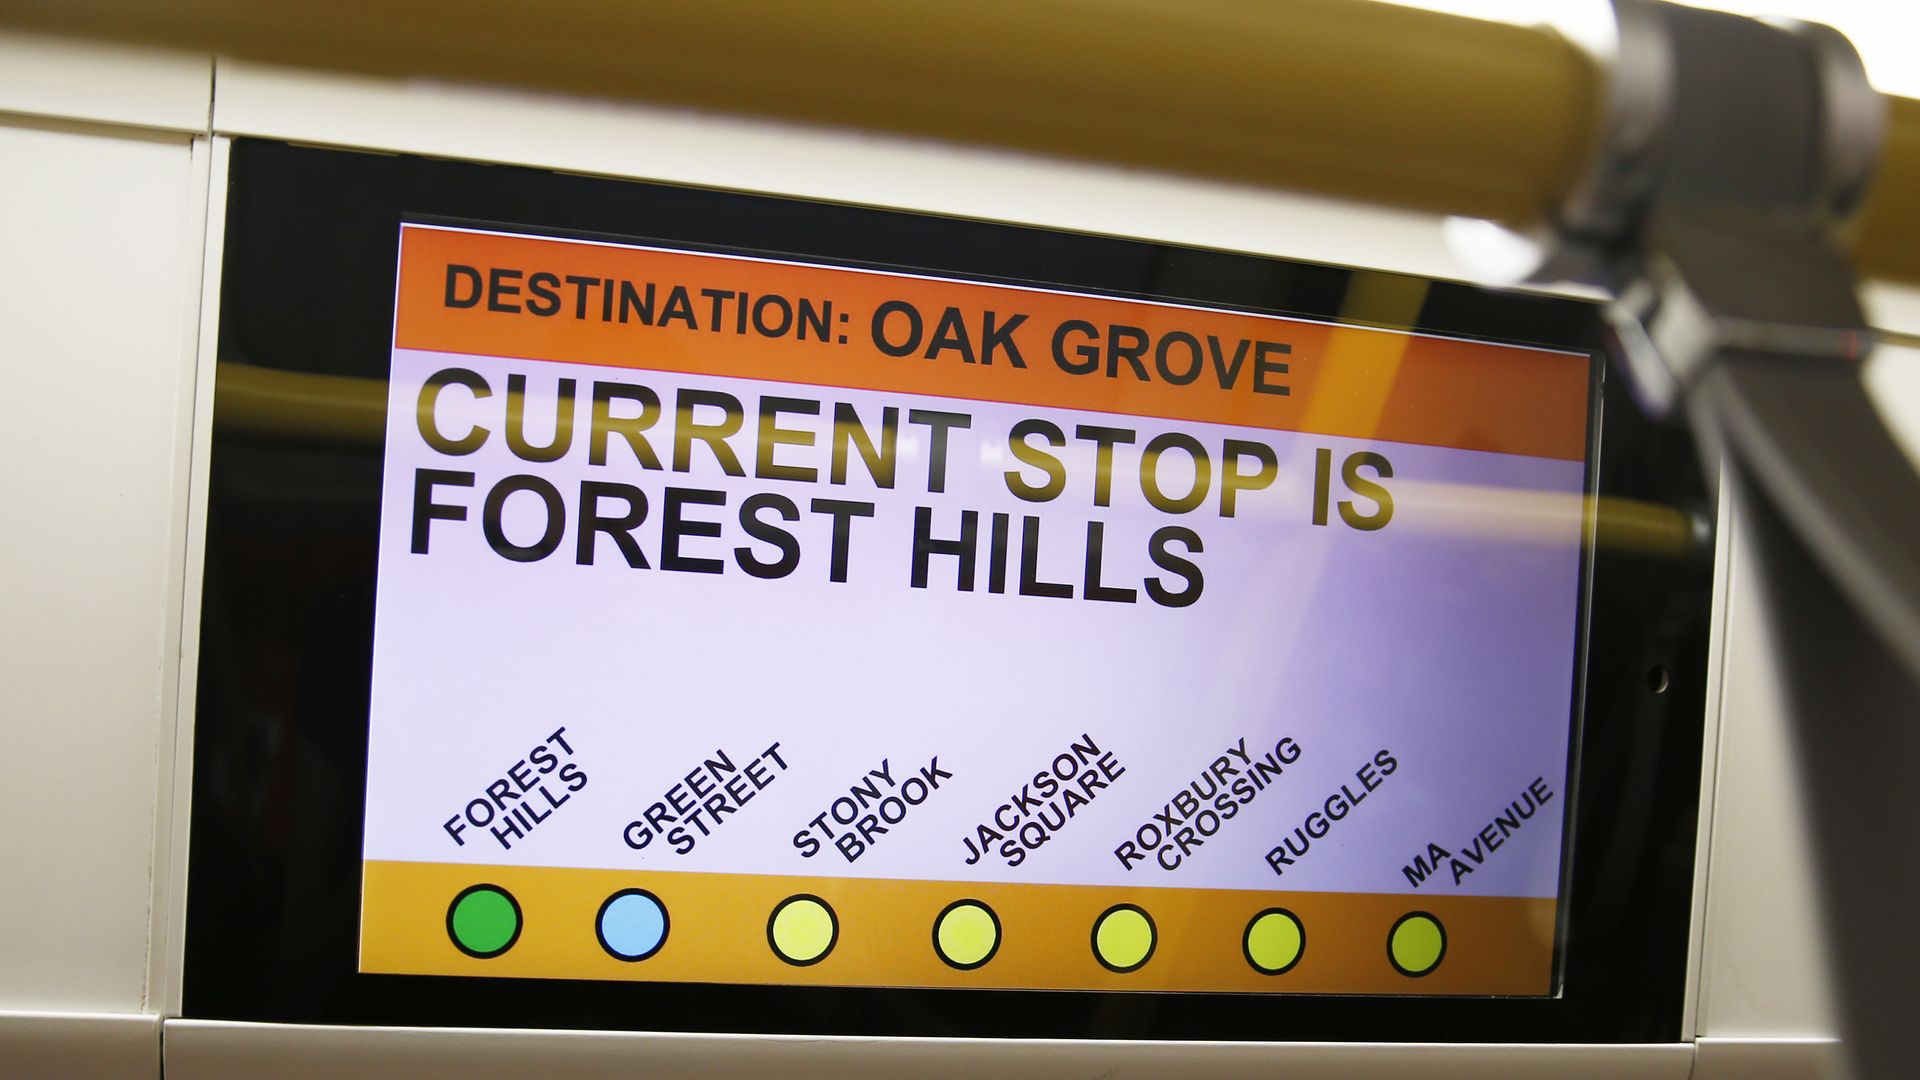 An LCD screen on the T shows the stops on the Orange Line, from Forest Hills to the destination of Oak Grove. 